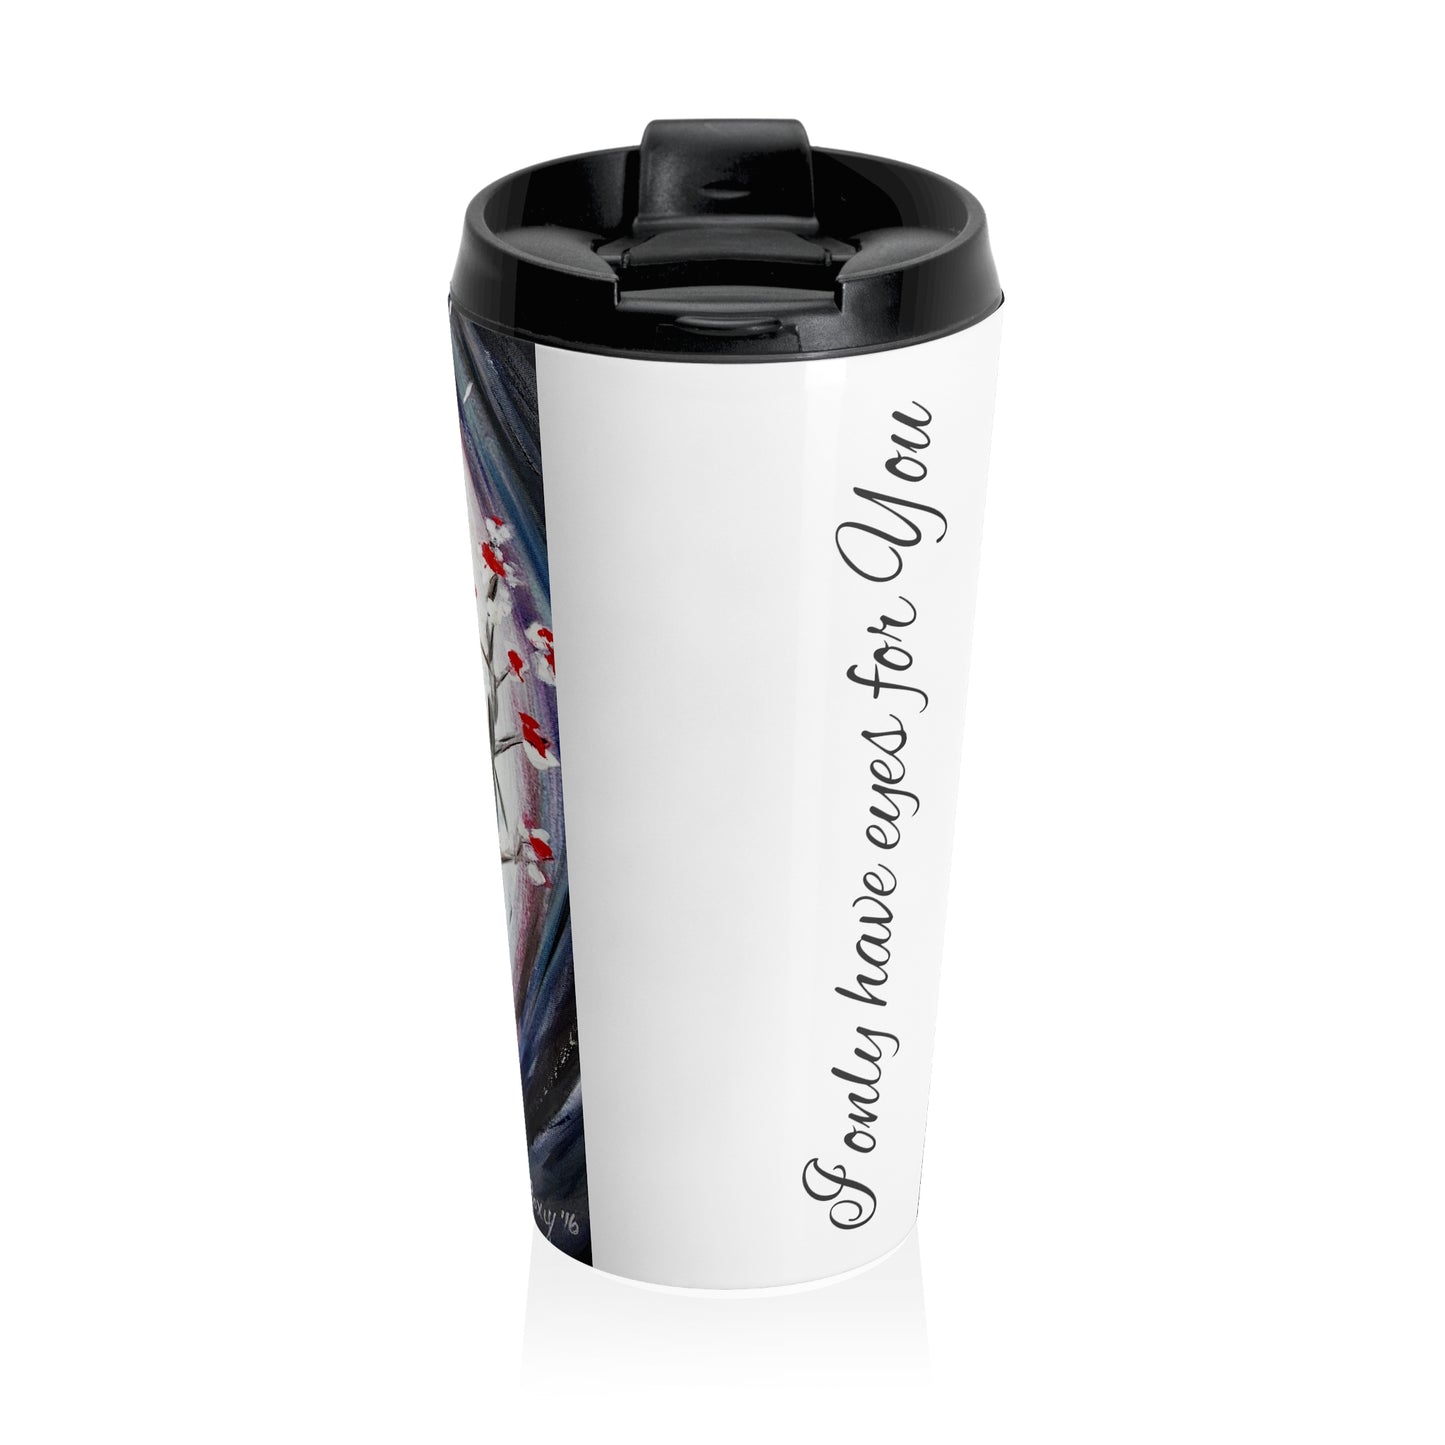 I only have eyes for You Couple in Paris Romantic Stainless Steel Travel Mug